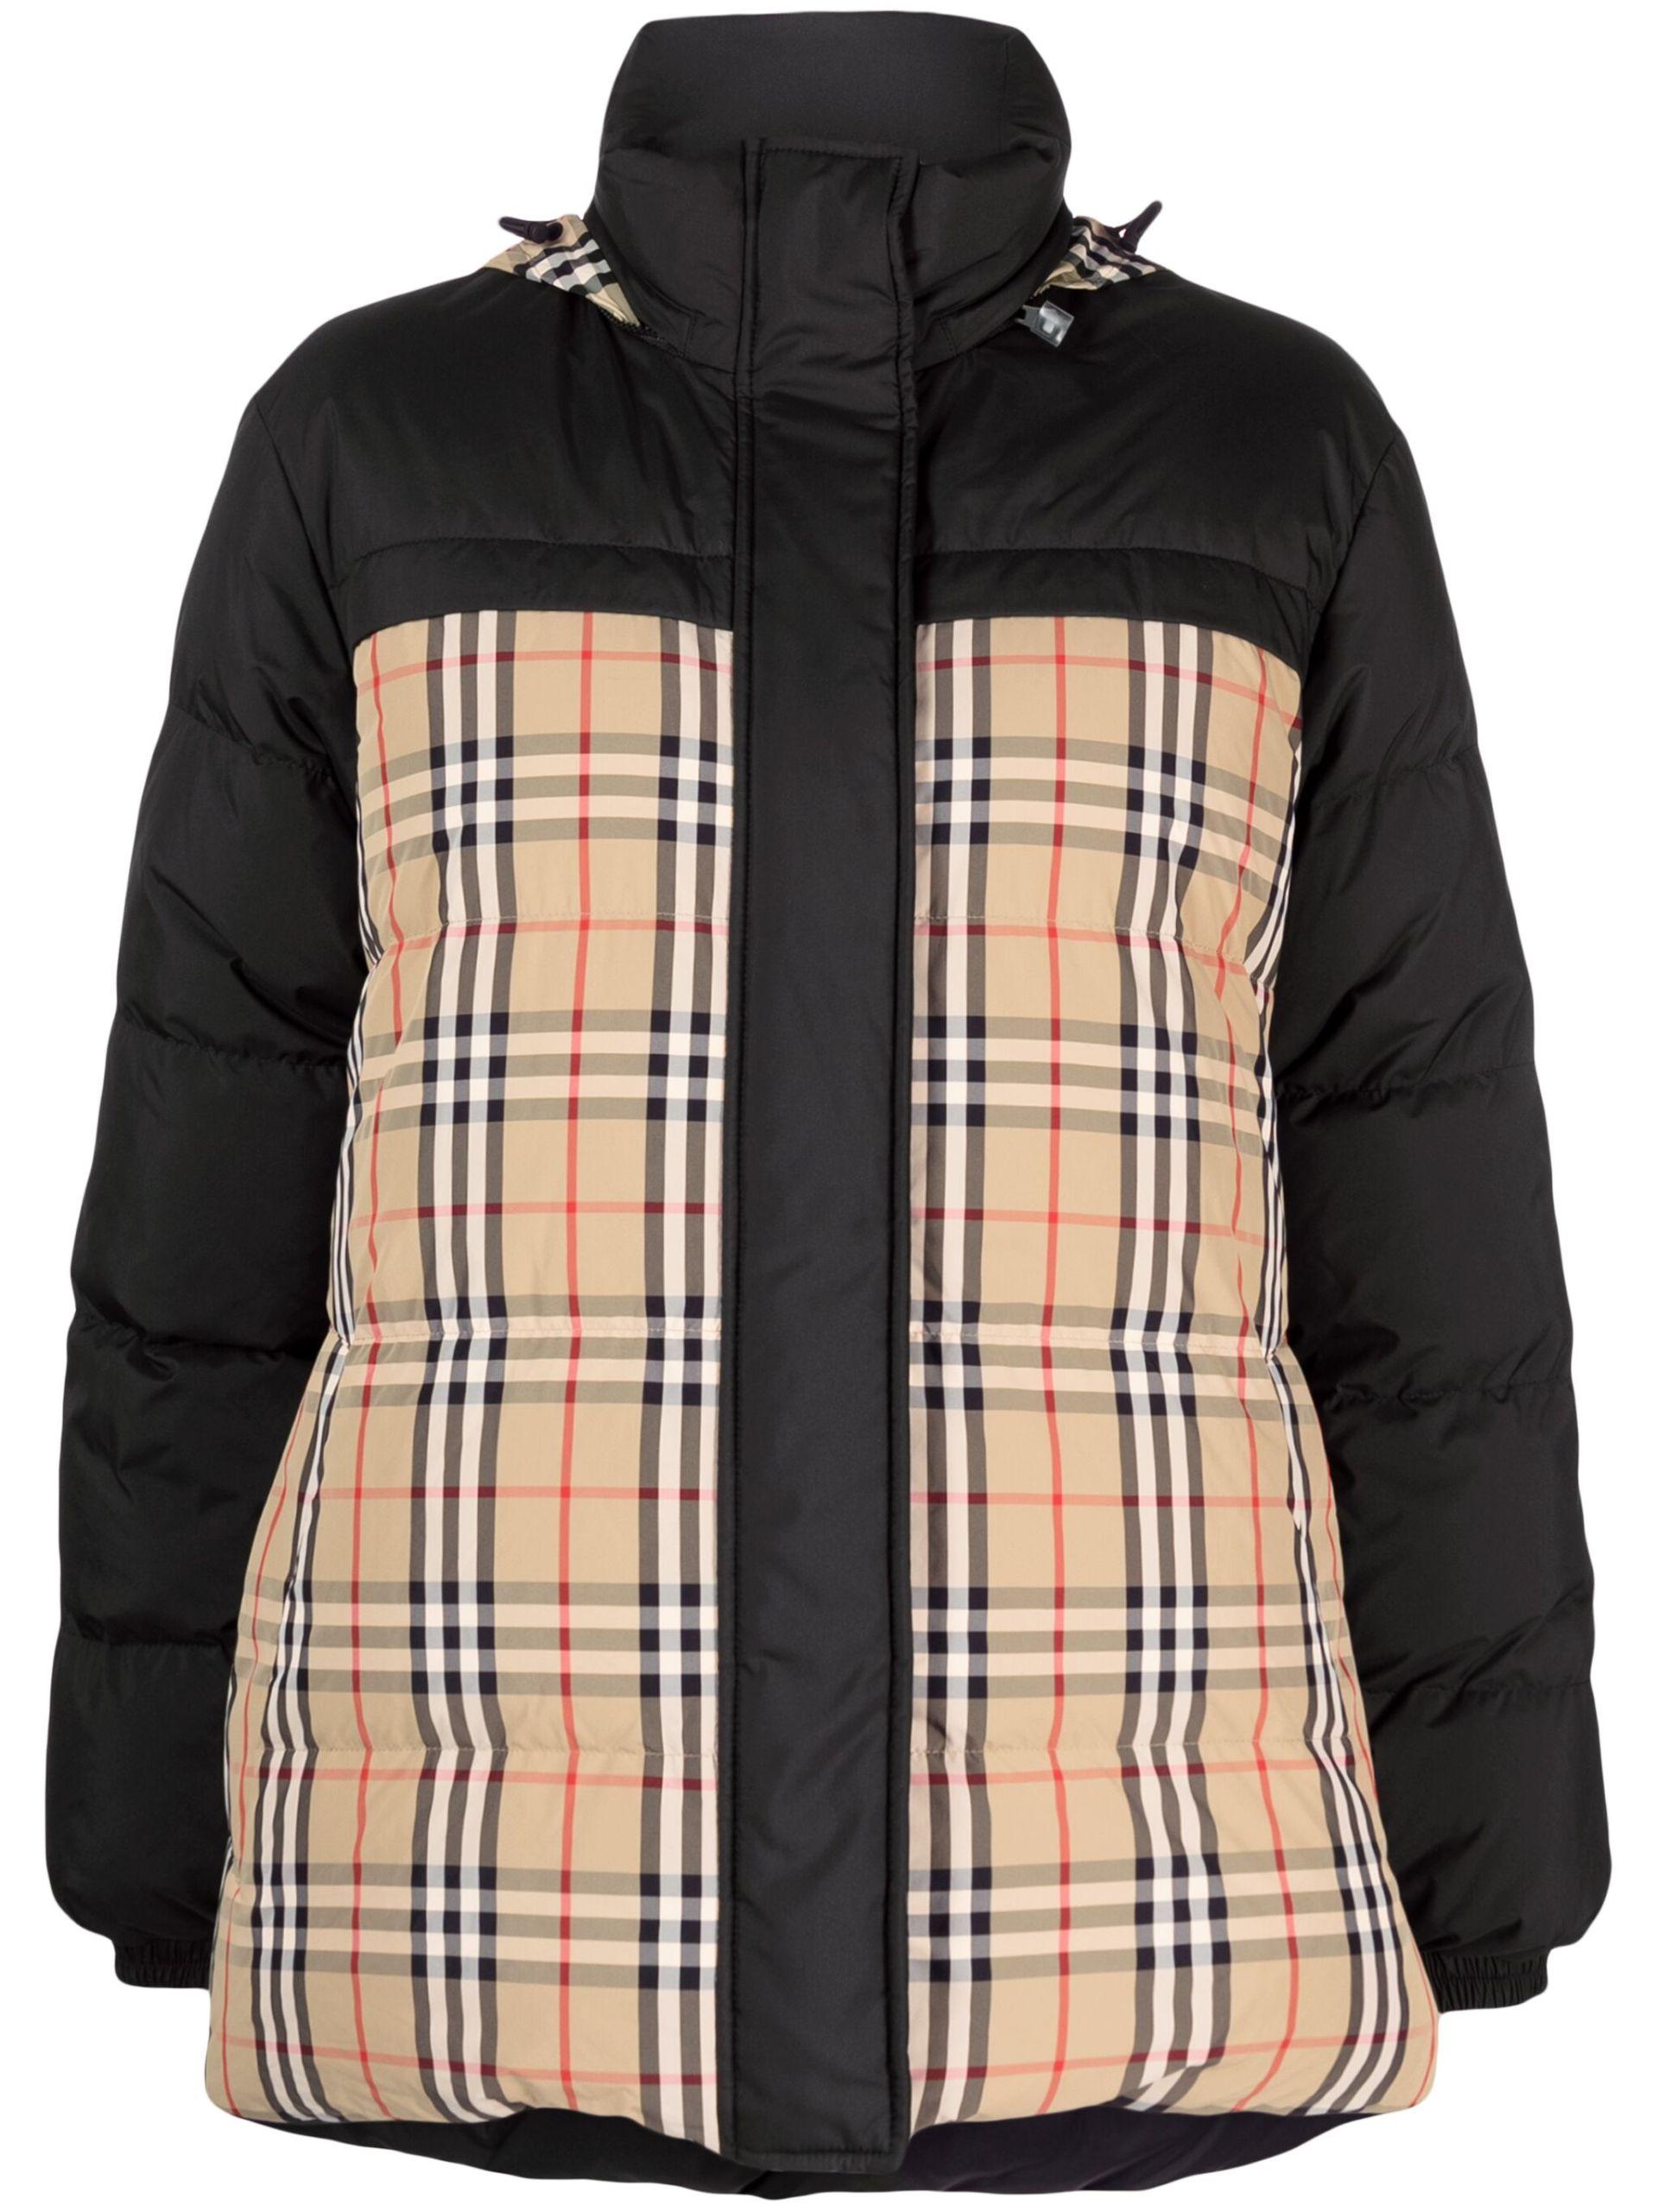 Burberry Reversible Down Puffer Jacket in Black | Lyst